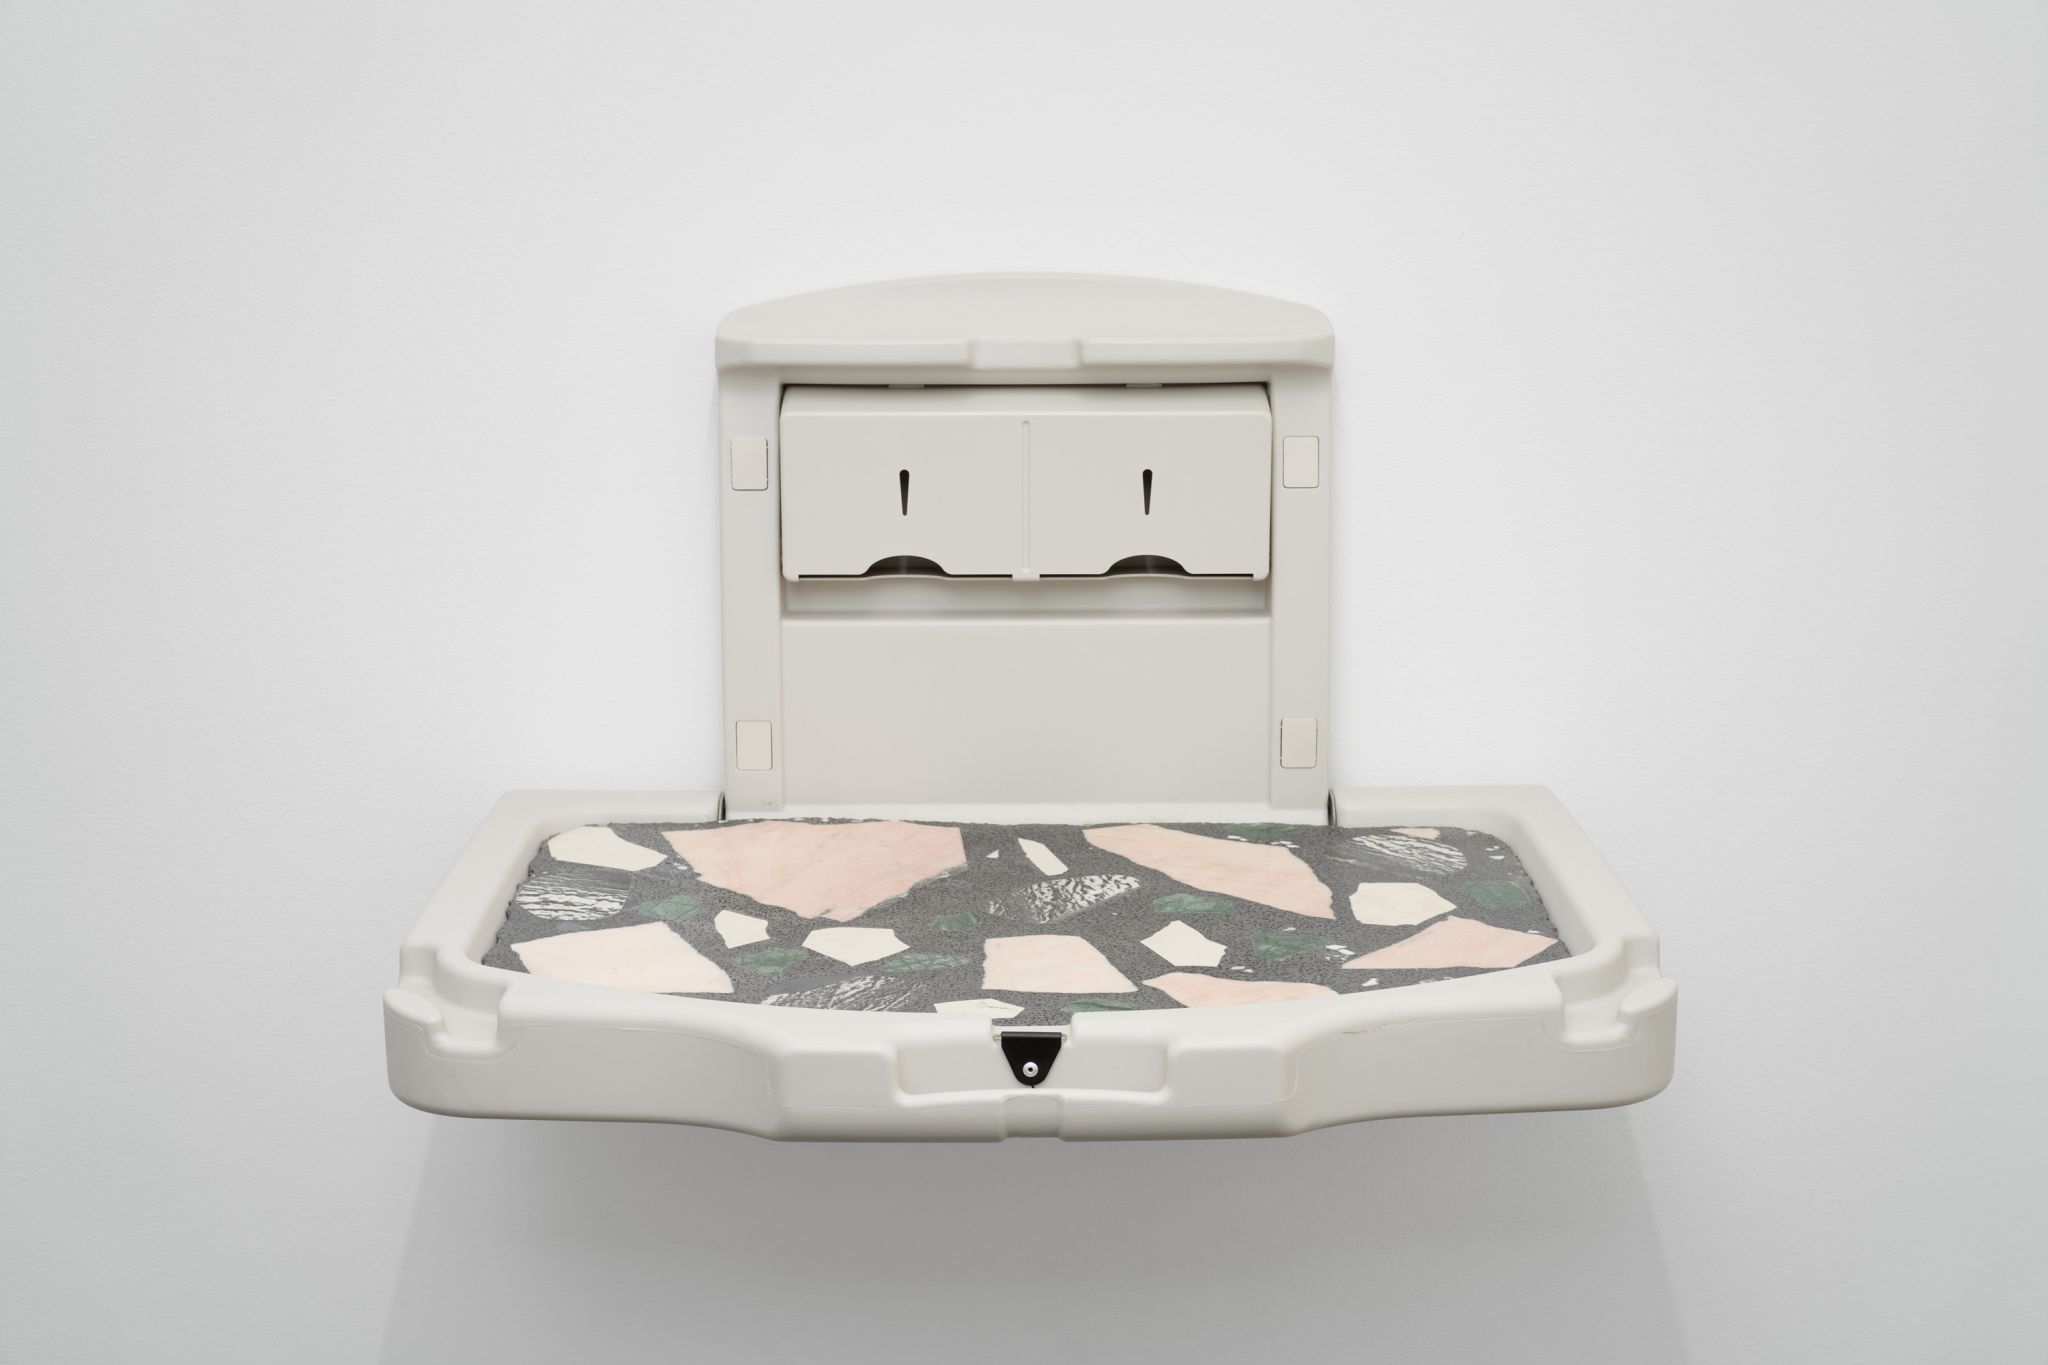 Nicole Wermers, Moodboard #3, 2016, Baby changing unit, cast terrazzo, 48.9 ⁠× ⁠88.3 ⁠× ⁠58.4 ⁠⁠cm, Courtesy the artist and Herald St, London